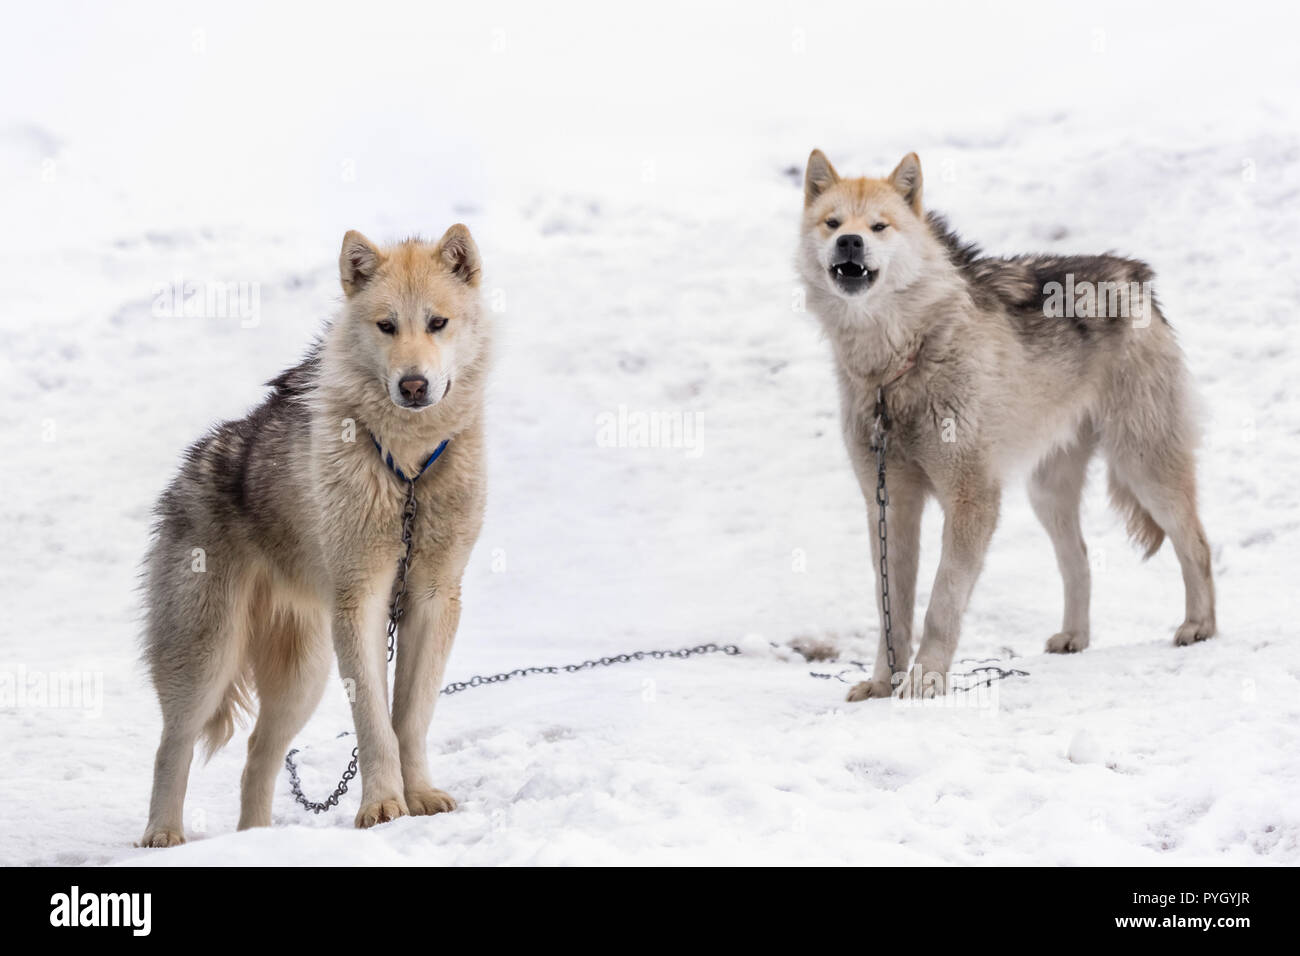 Two greenlandic Inuit sledding dogs standing on alert in the snow, Sisimiut, Greenland Stock Photo